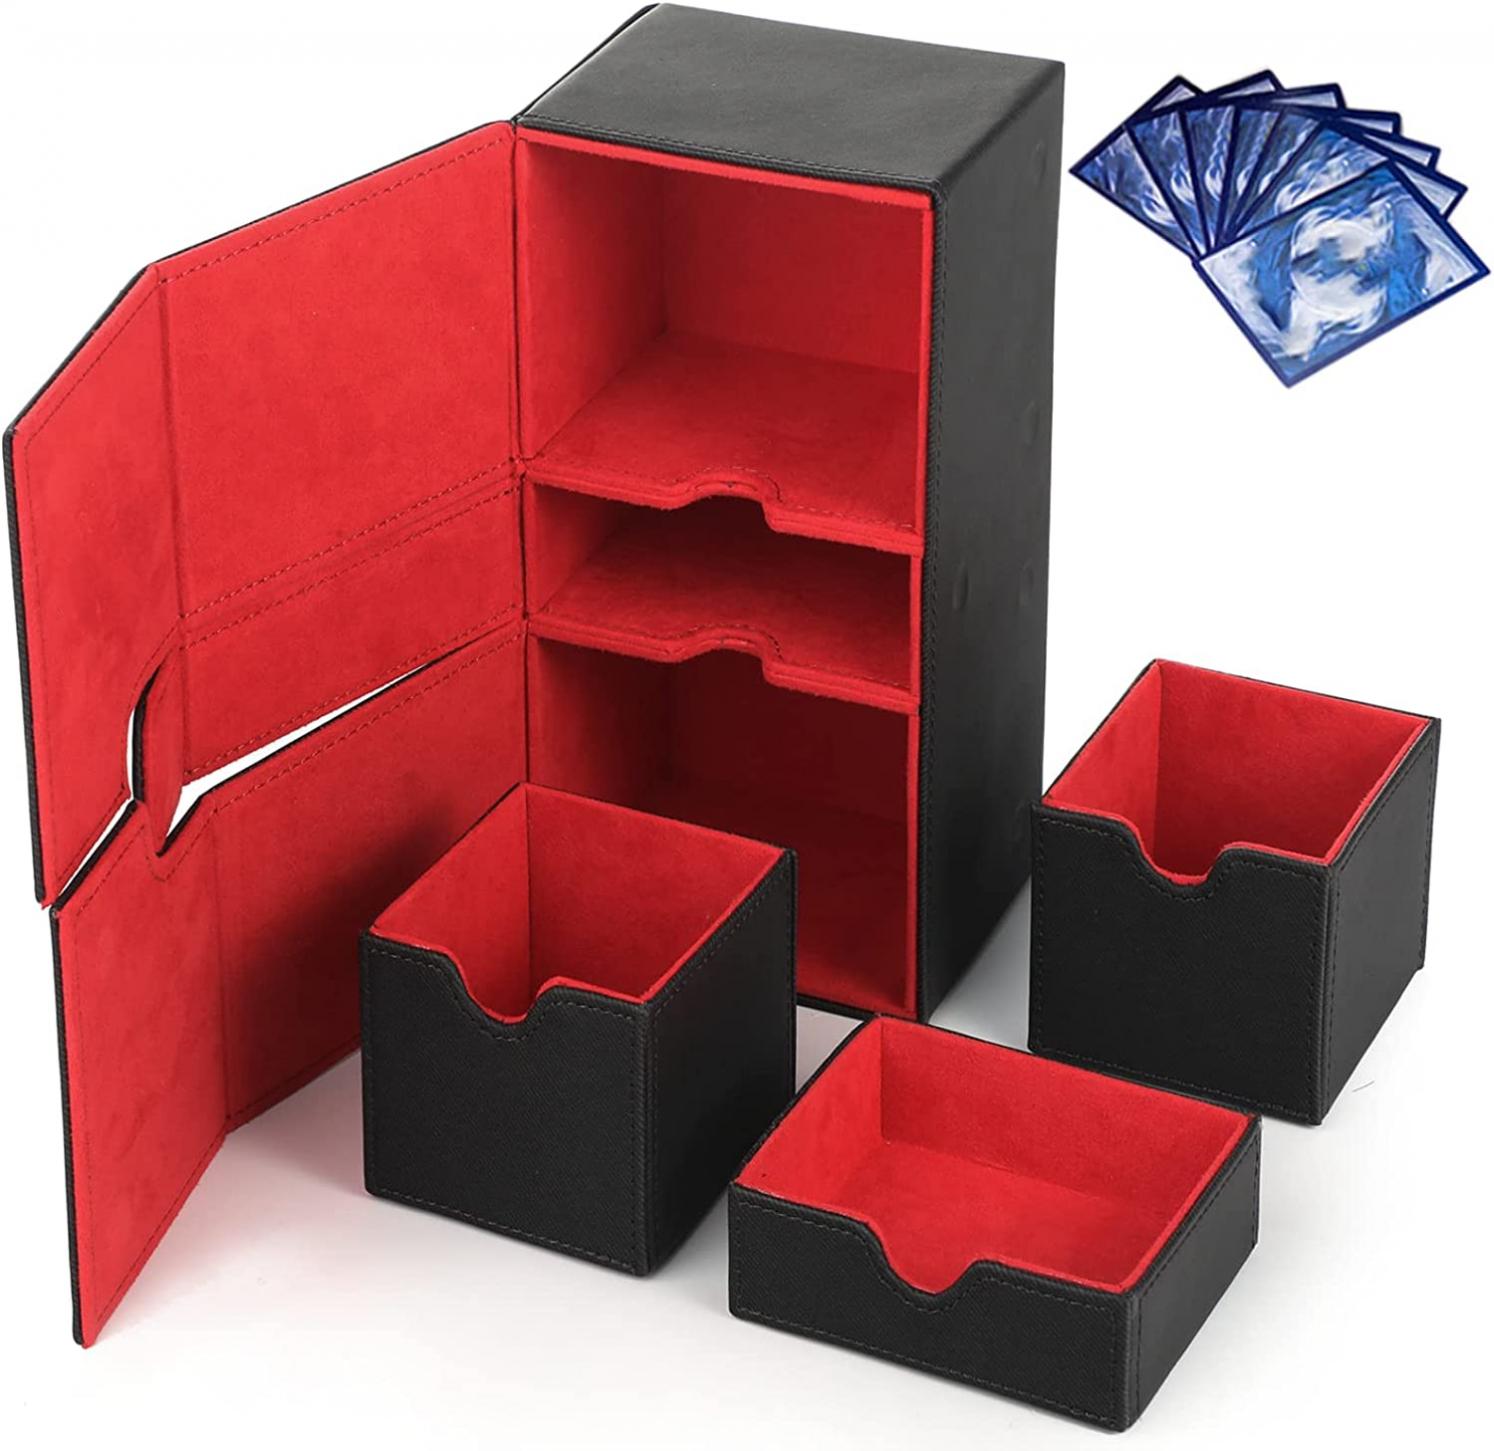 Card Deck Box, Large Flip Deck Case with 3 Trays for 220+ Sleeved Cards, PU Leather Double Deck Box for YuGiOh, TCG, MTG, Uno, Ultraman, Baseball Cards 7.95" x 4.53" x 3.54"